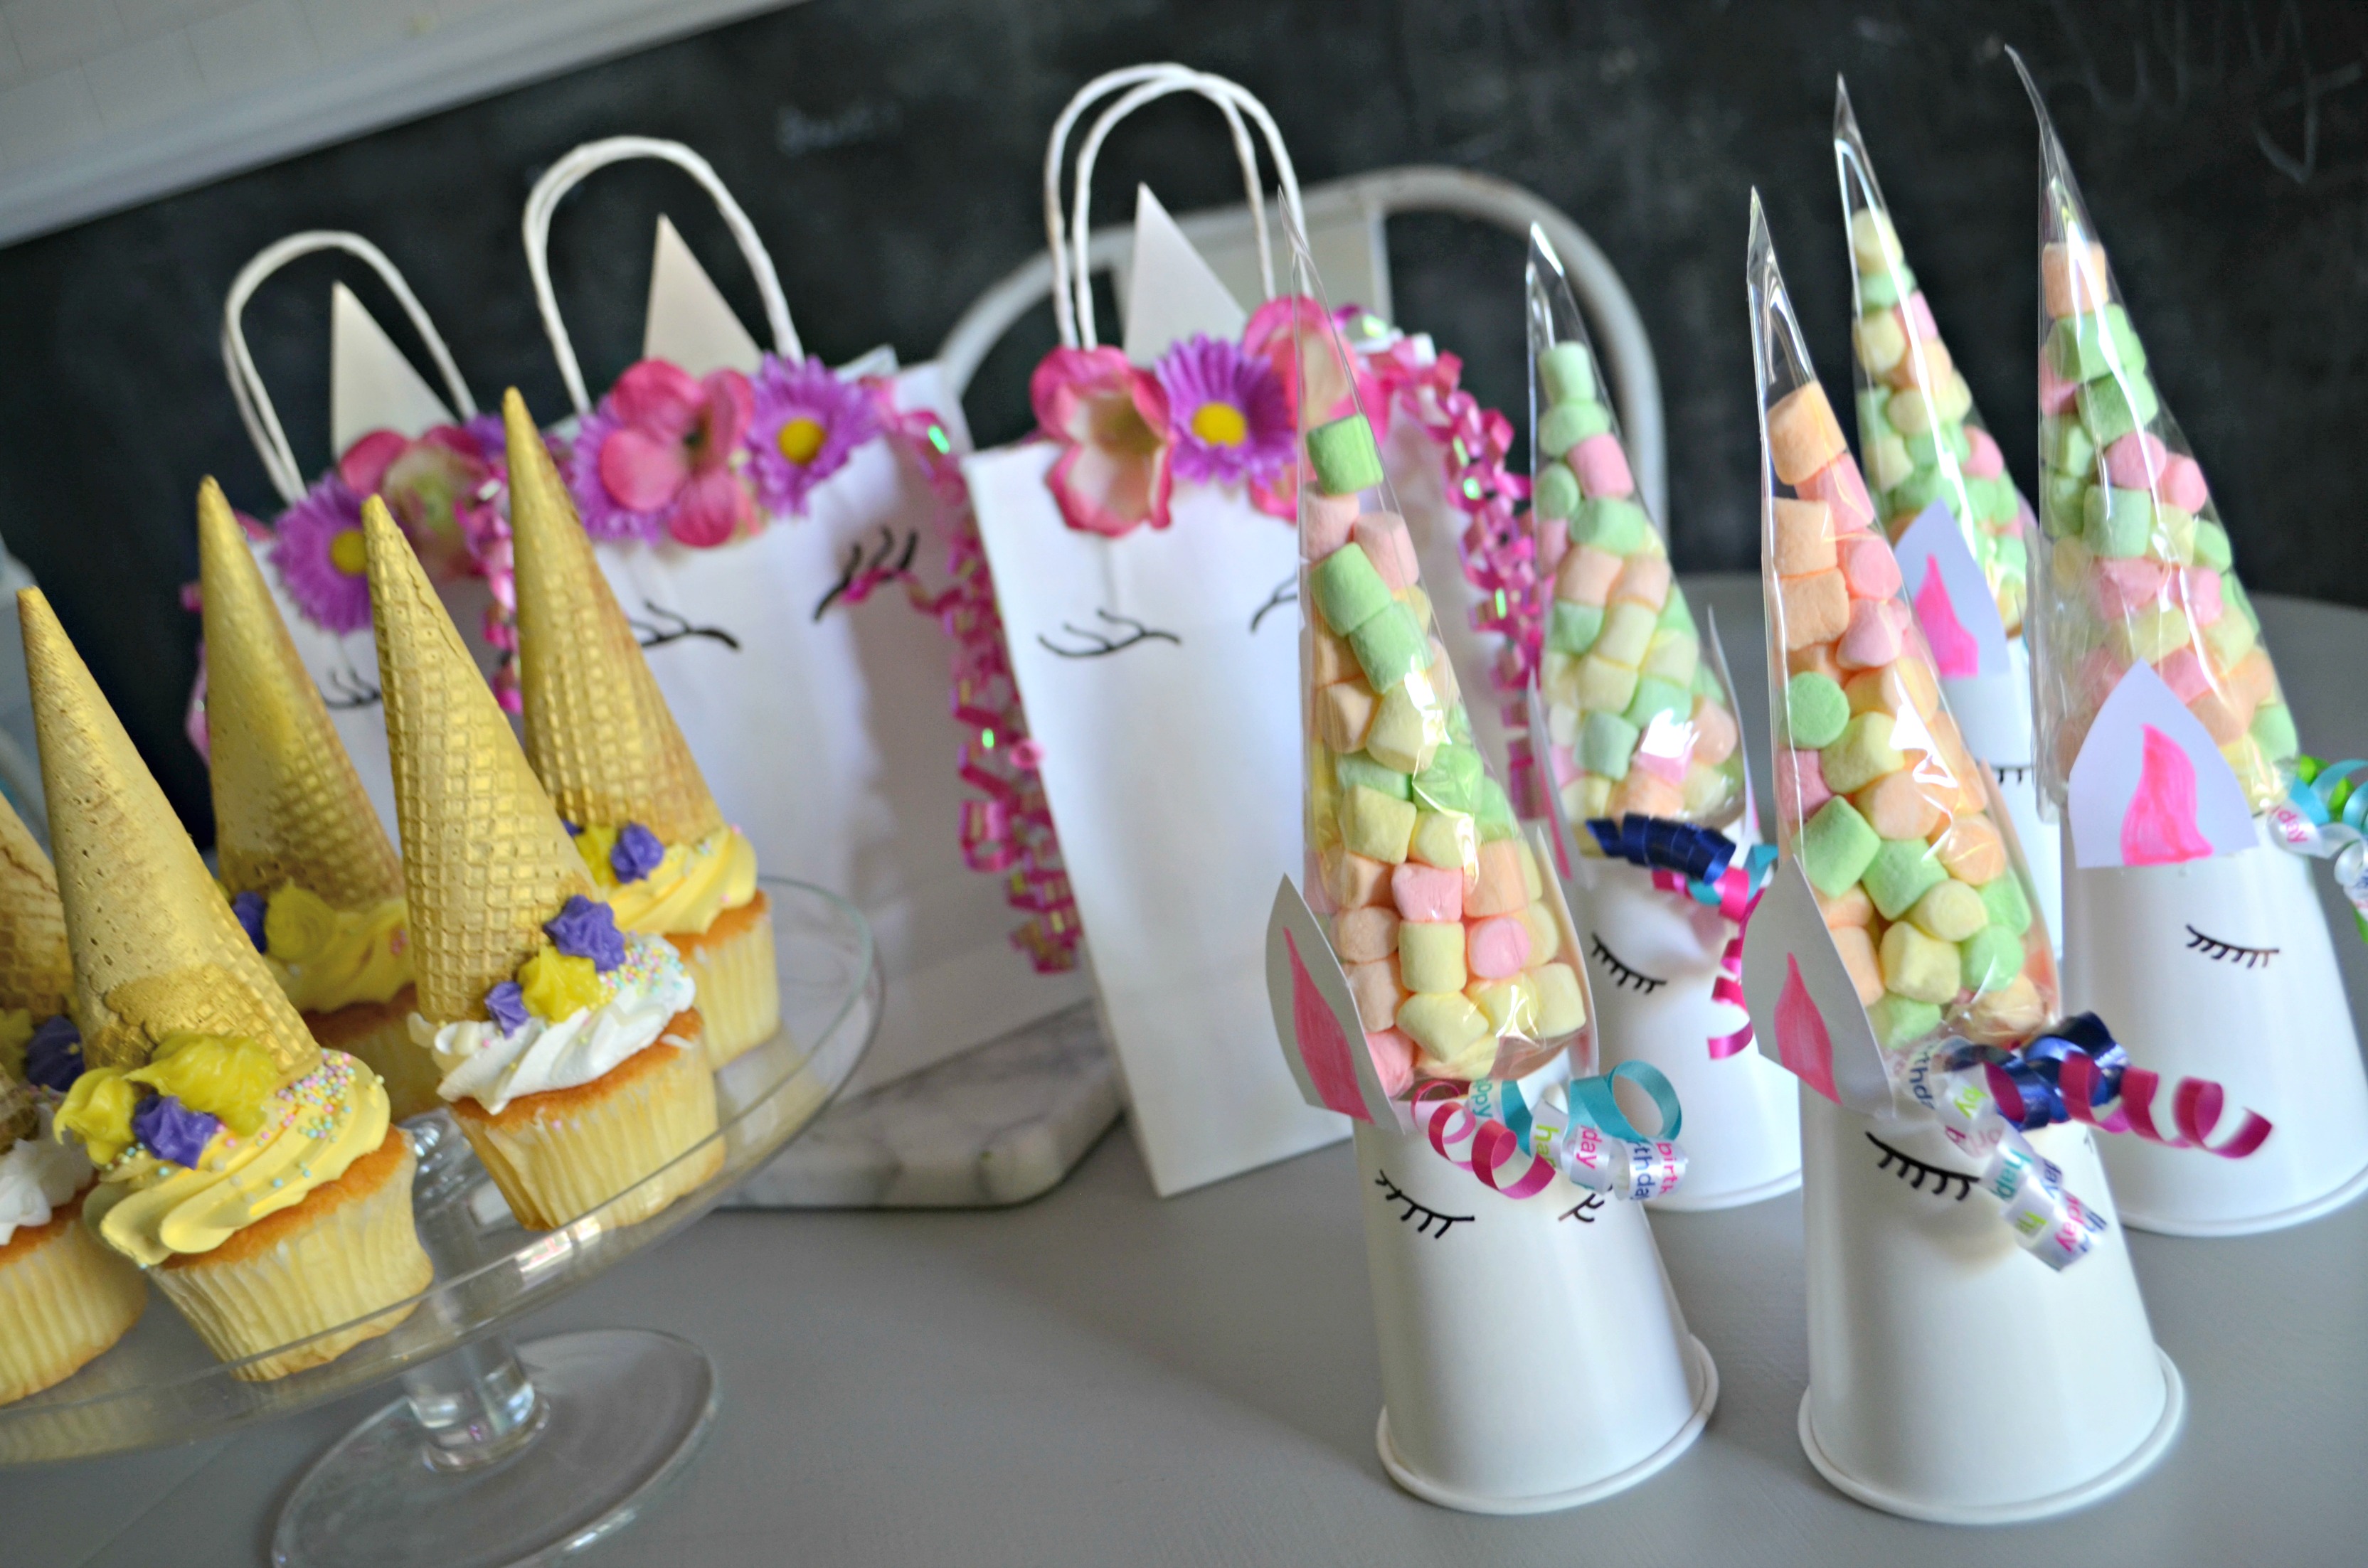 UNICORN PARTY FAVORS Birthday Mini Candy Favor Buckets -   Unicorn  party favors, Unicorn party, Unicorn themed birthday party